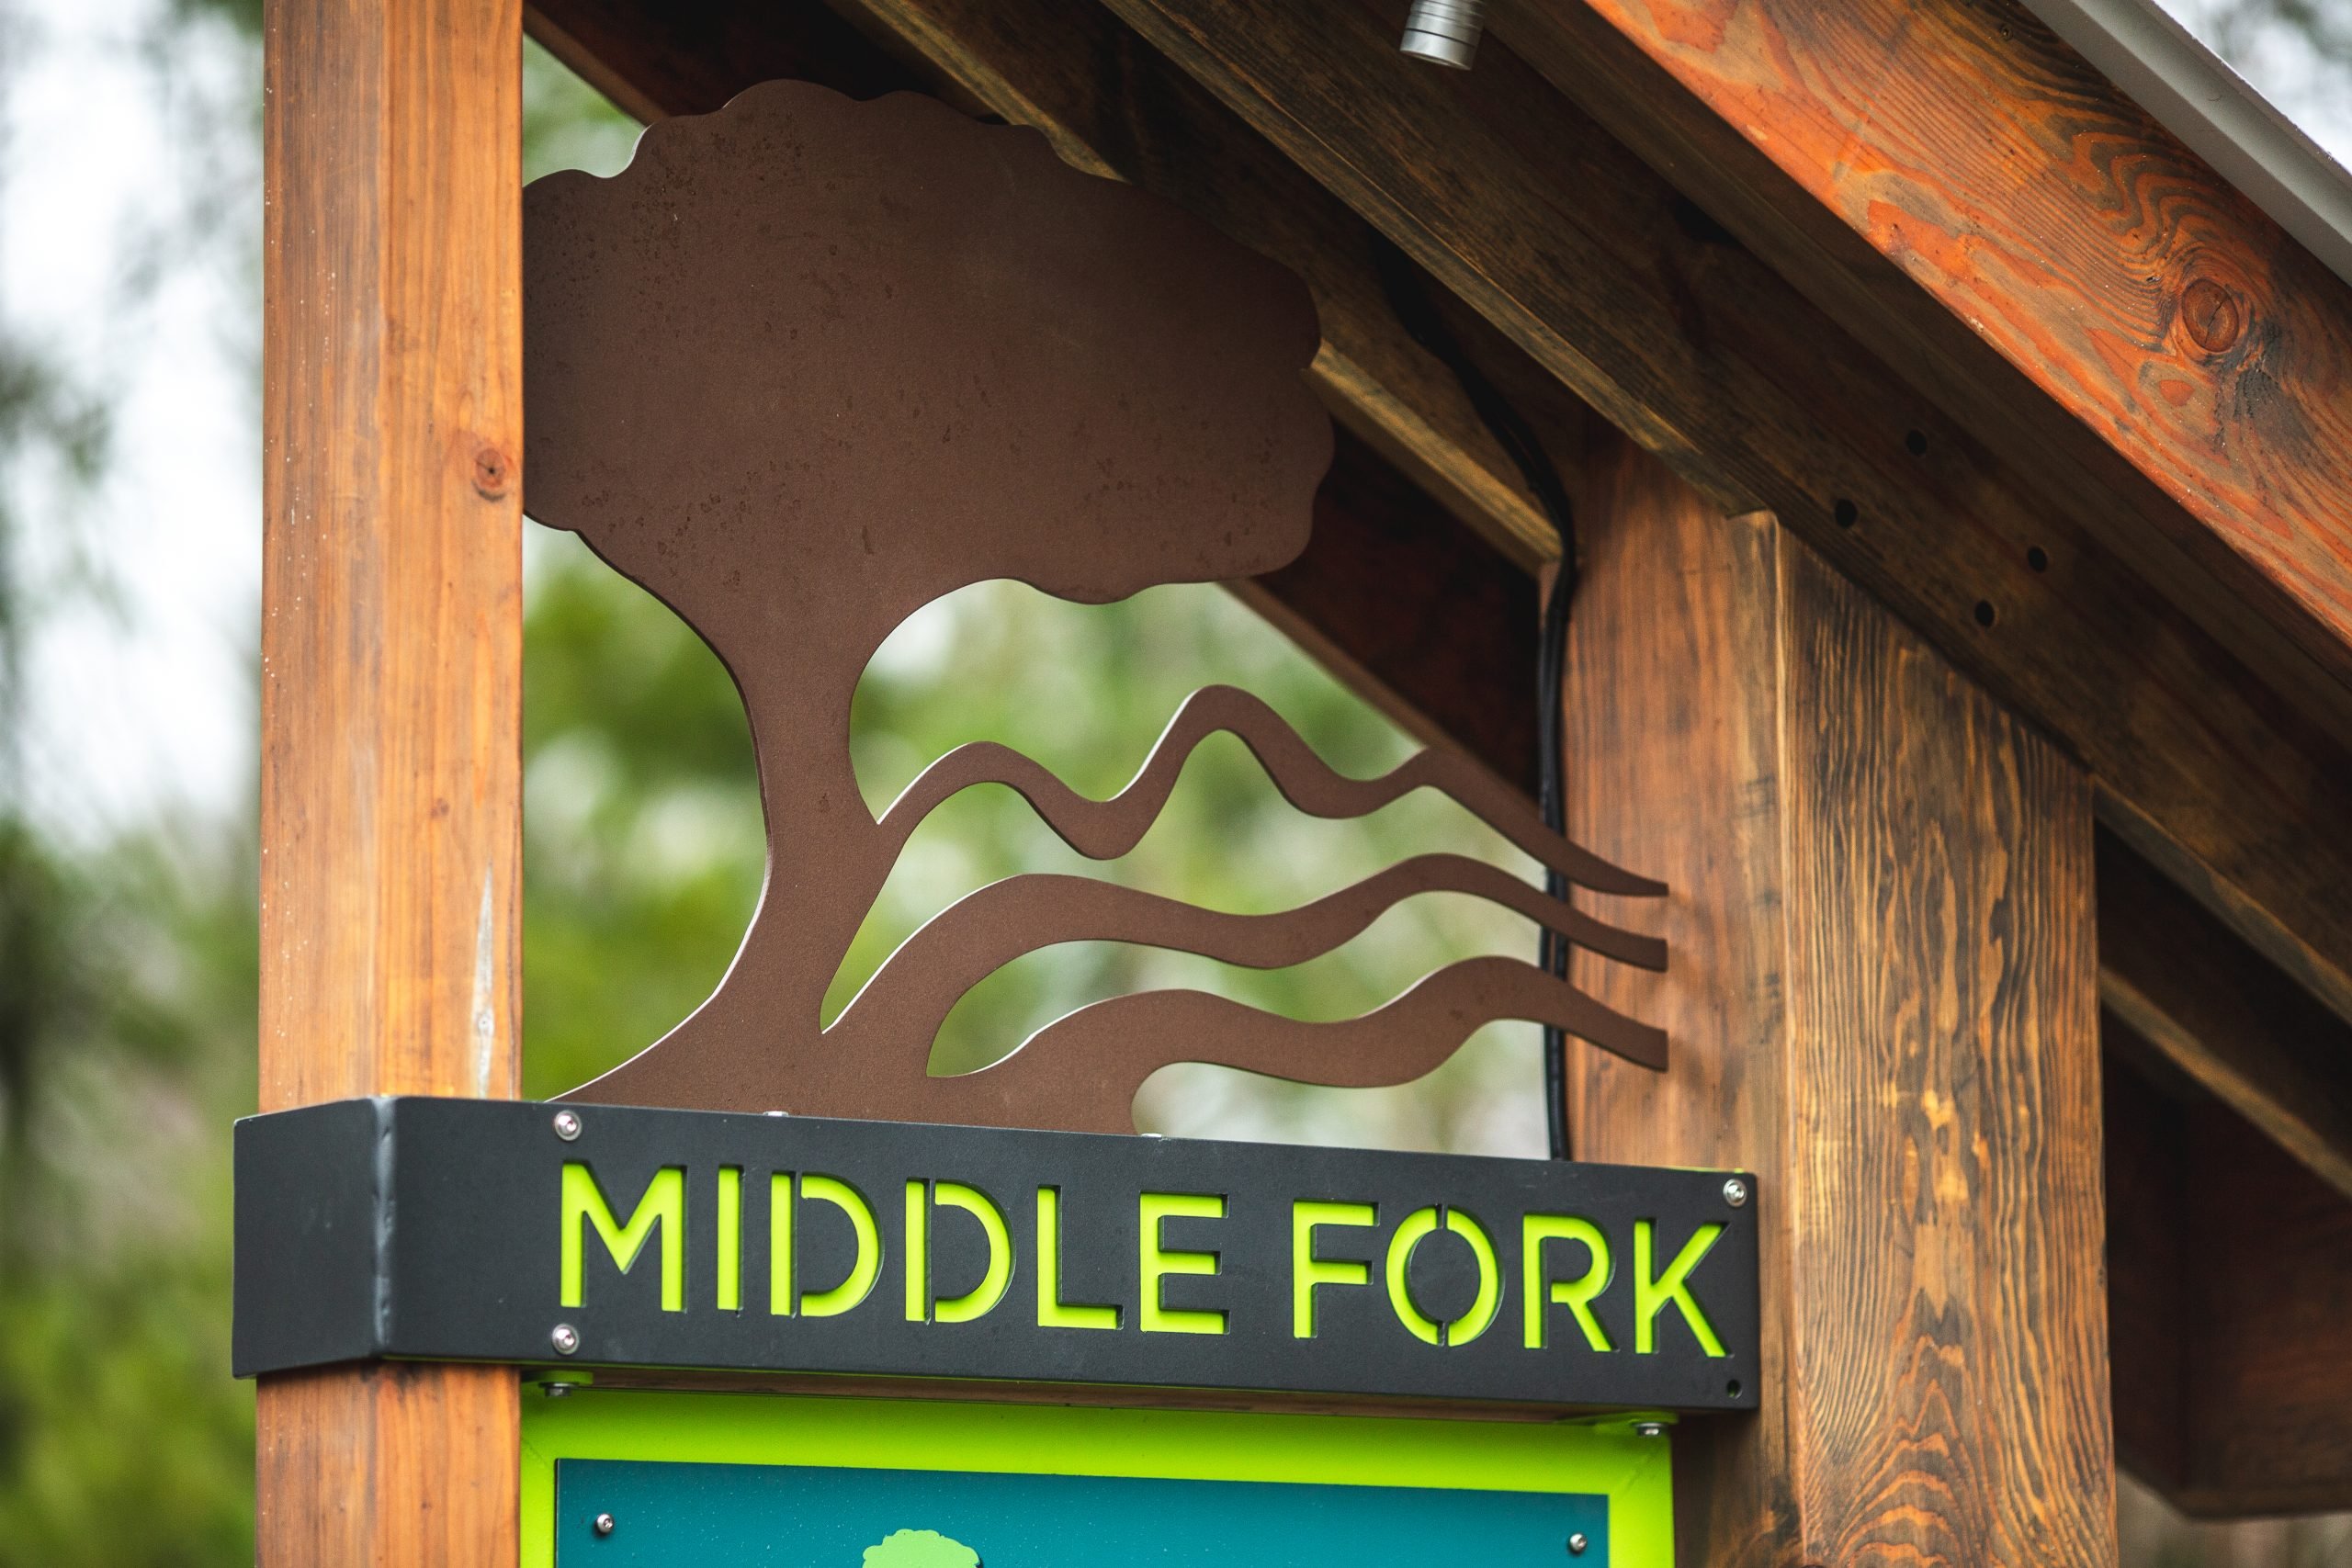 Middle Fork Greenway Sign